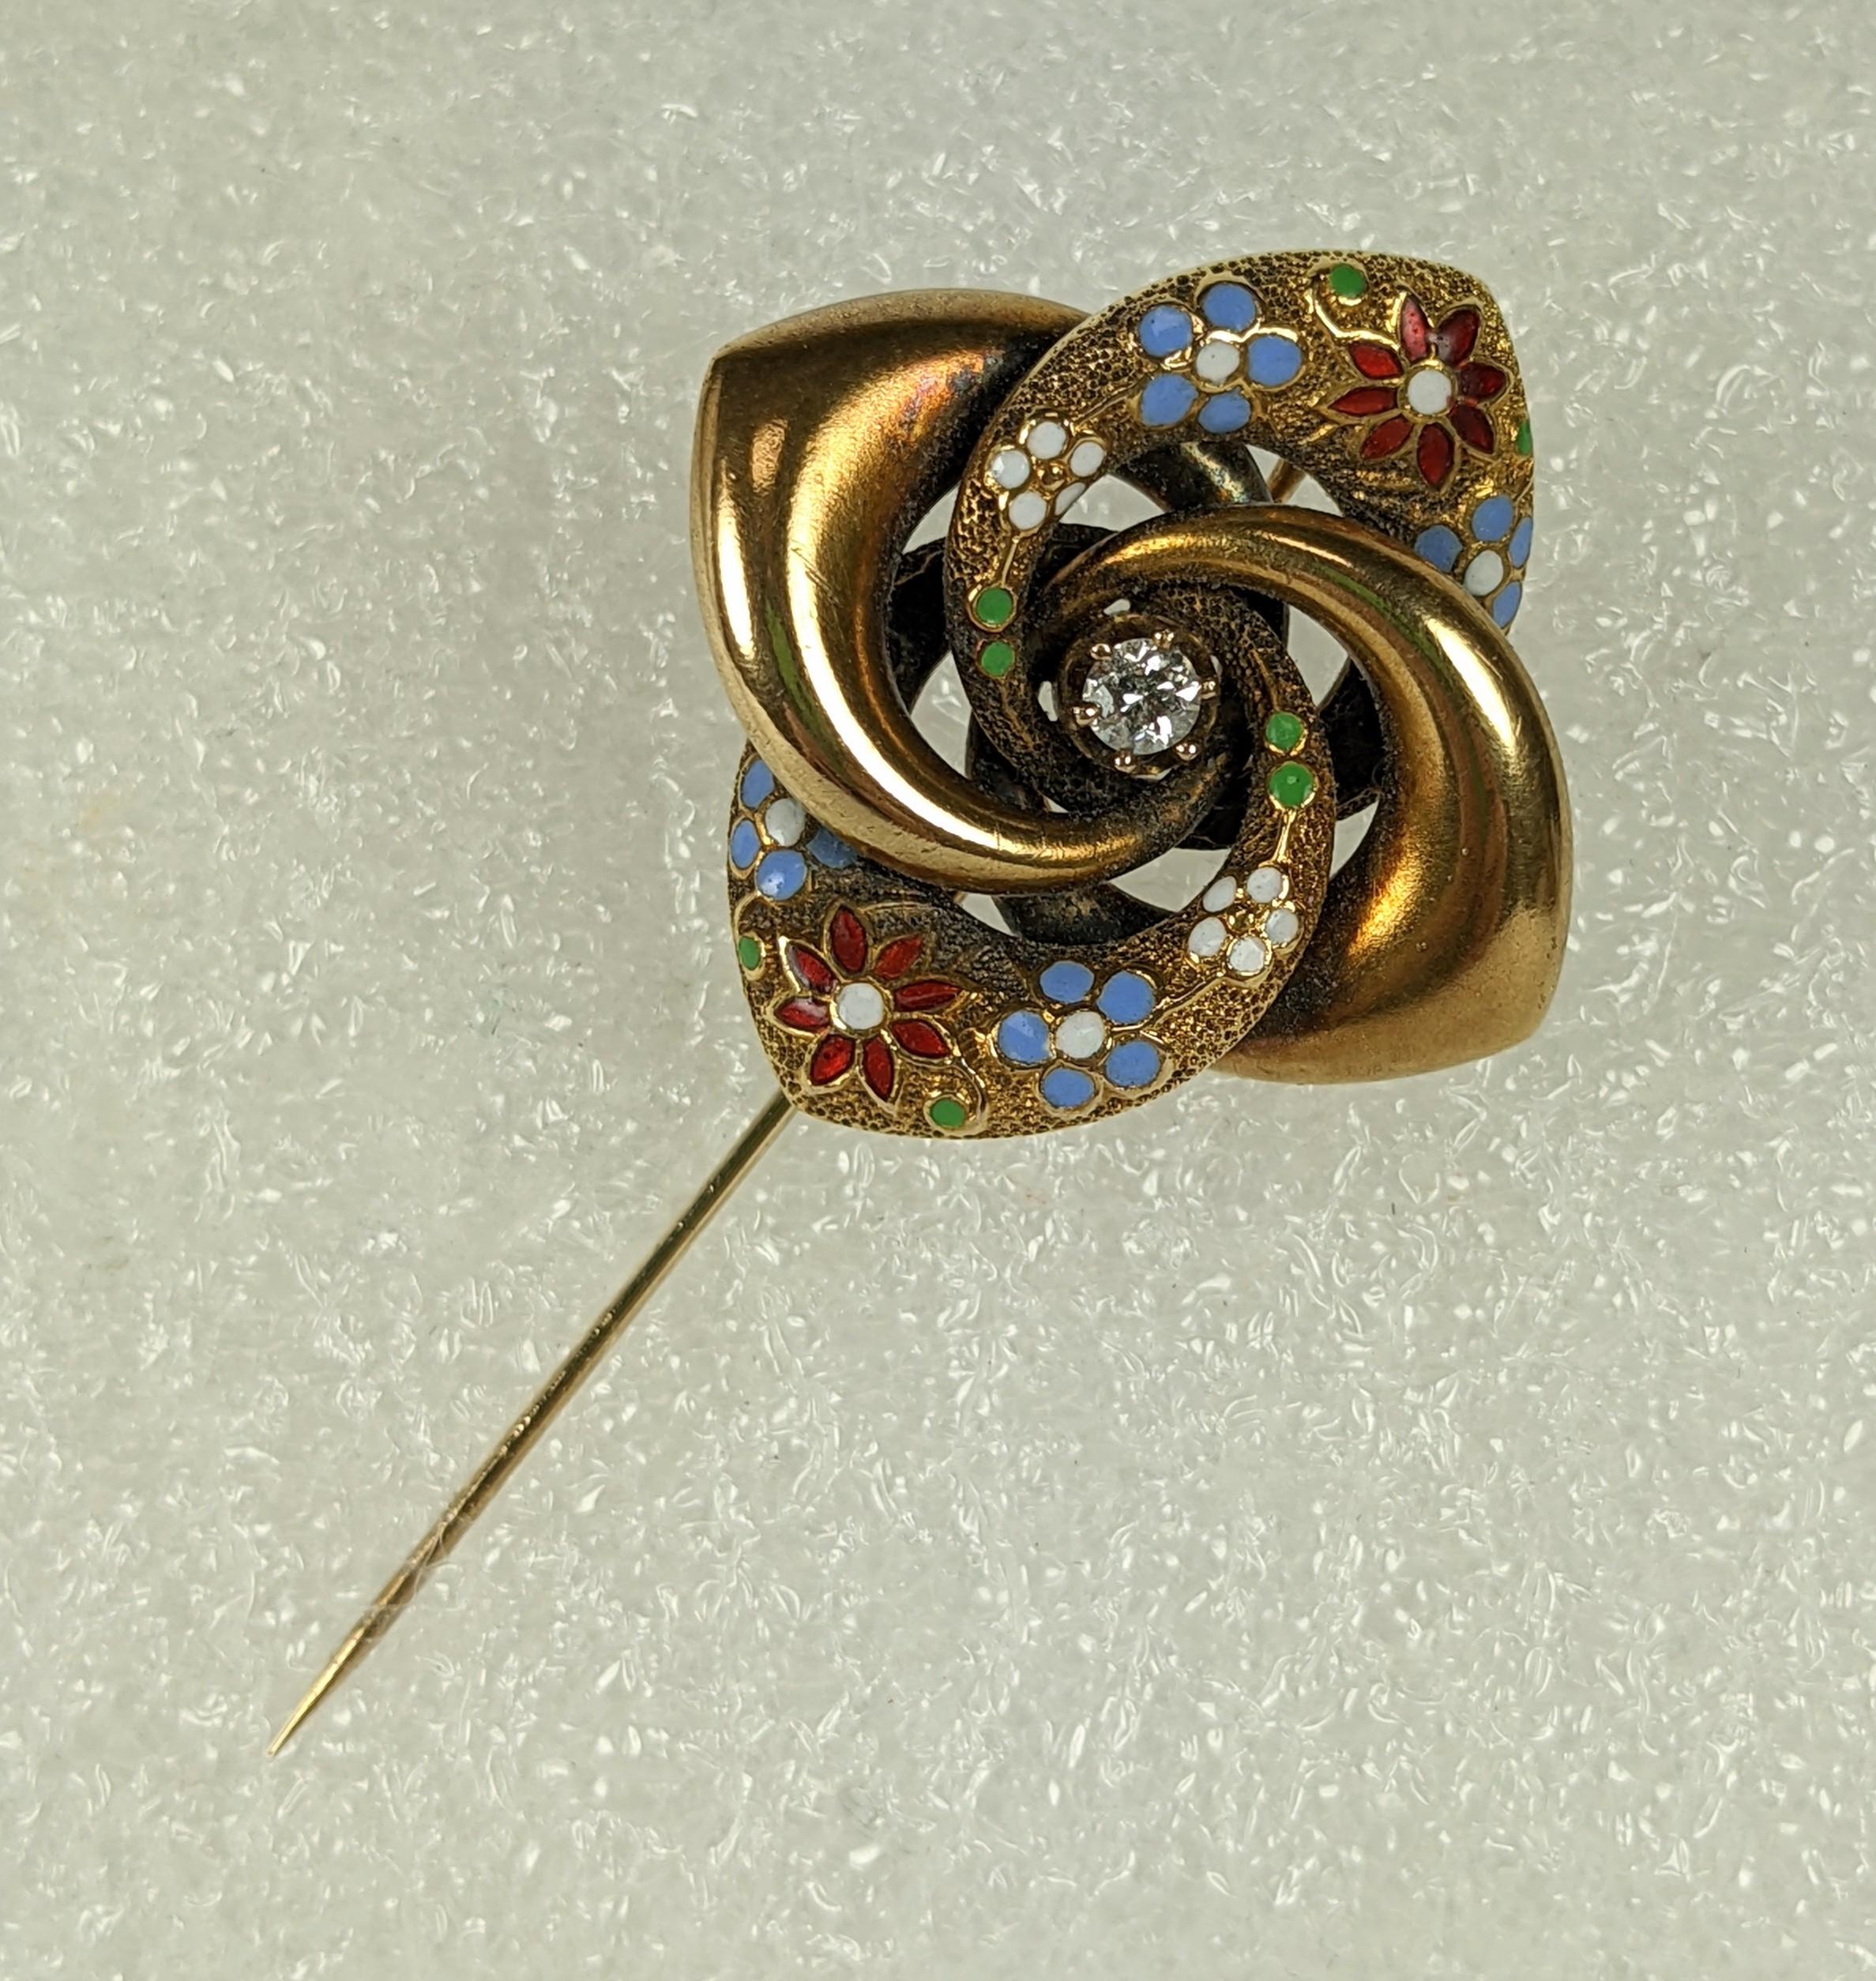 Large Victorian Enamel and Diamond Pinwheel Stickpin in 14k from the late 19th Century. Originally a brooch but converted to a stickpin later. Finely enameled in red, blue and white florals. 1870 USA. 1.25